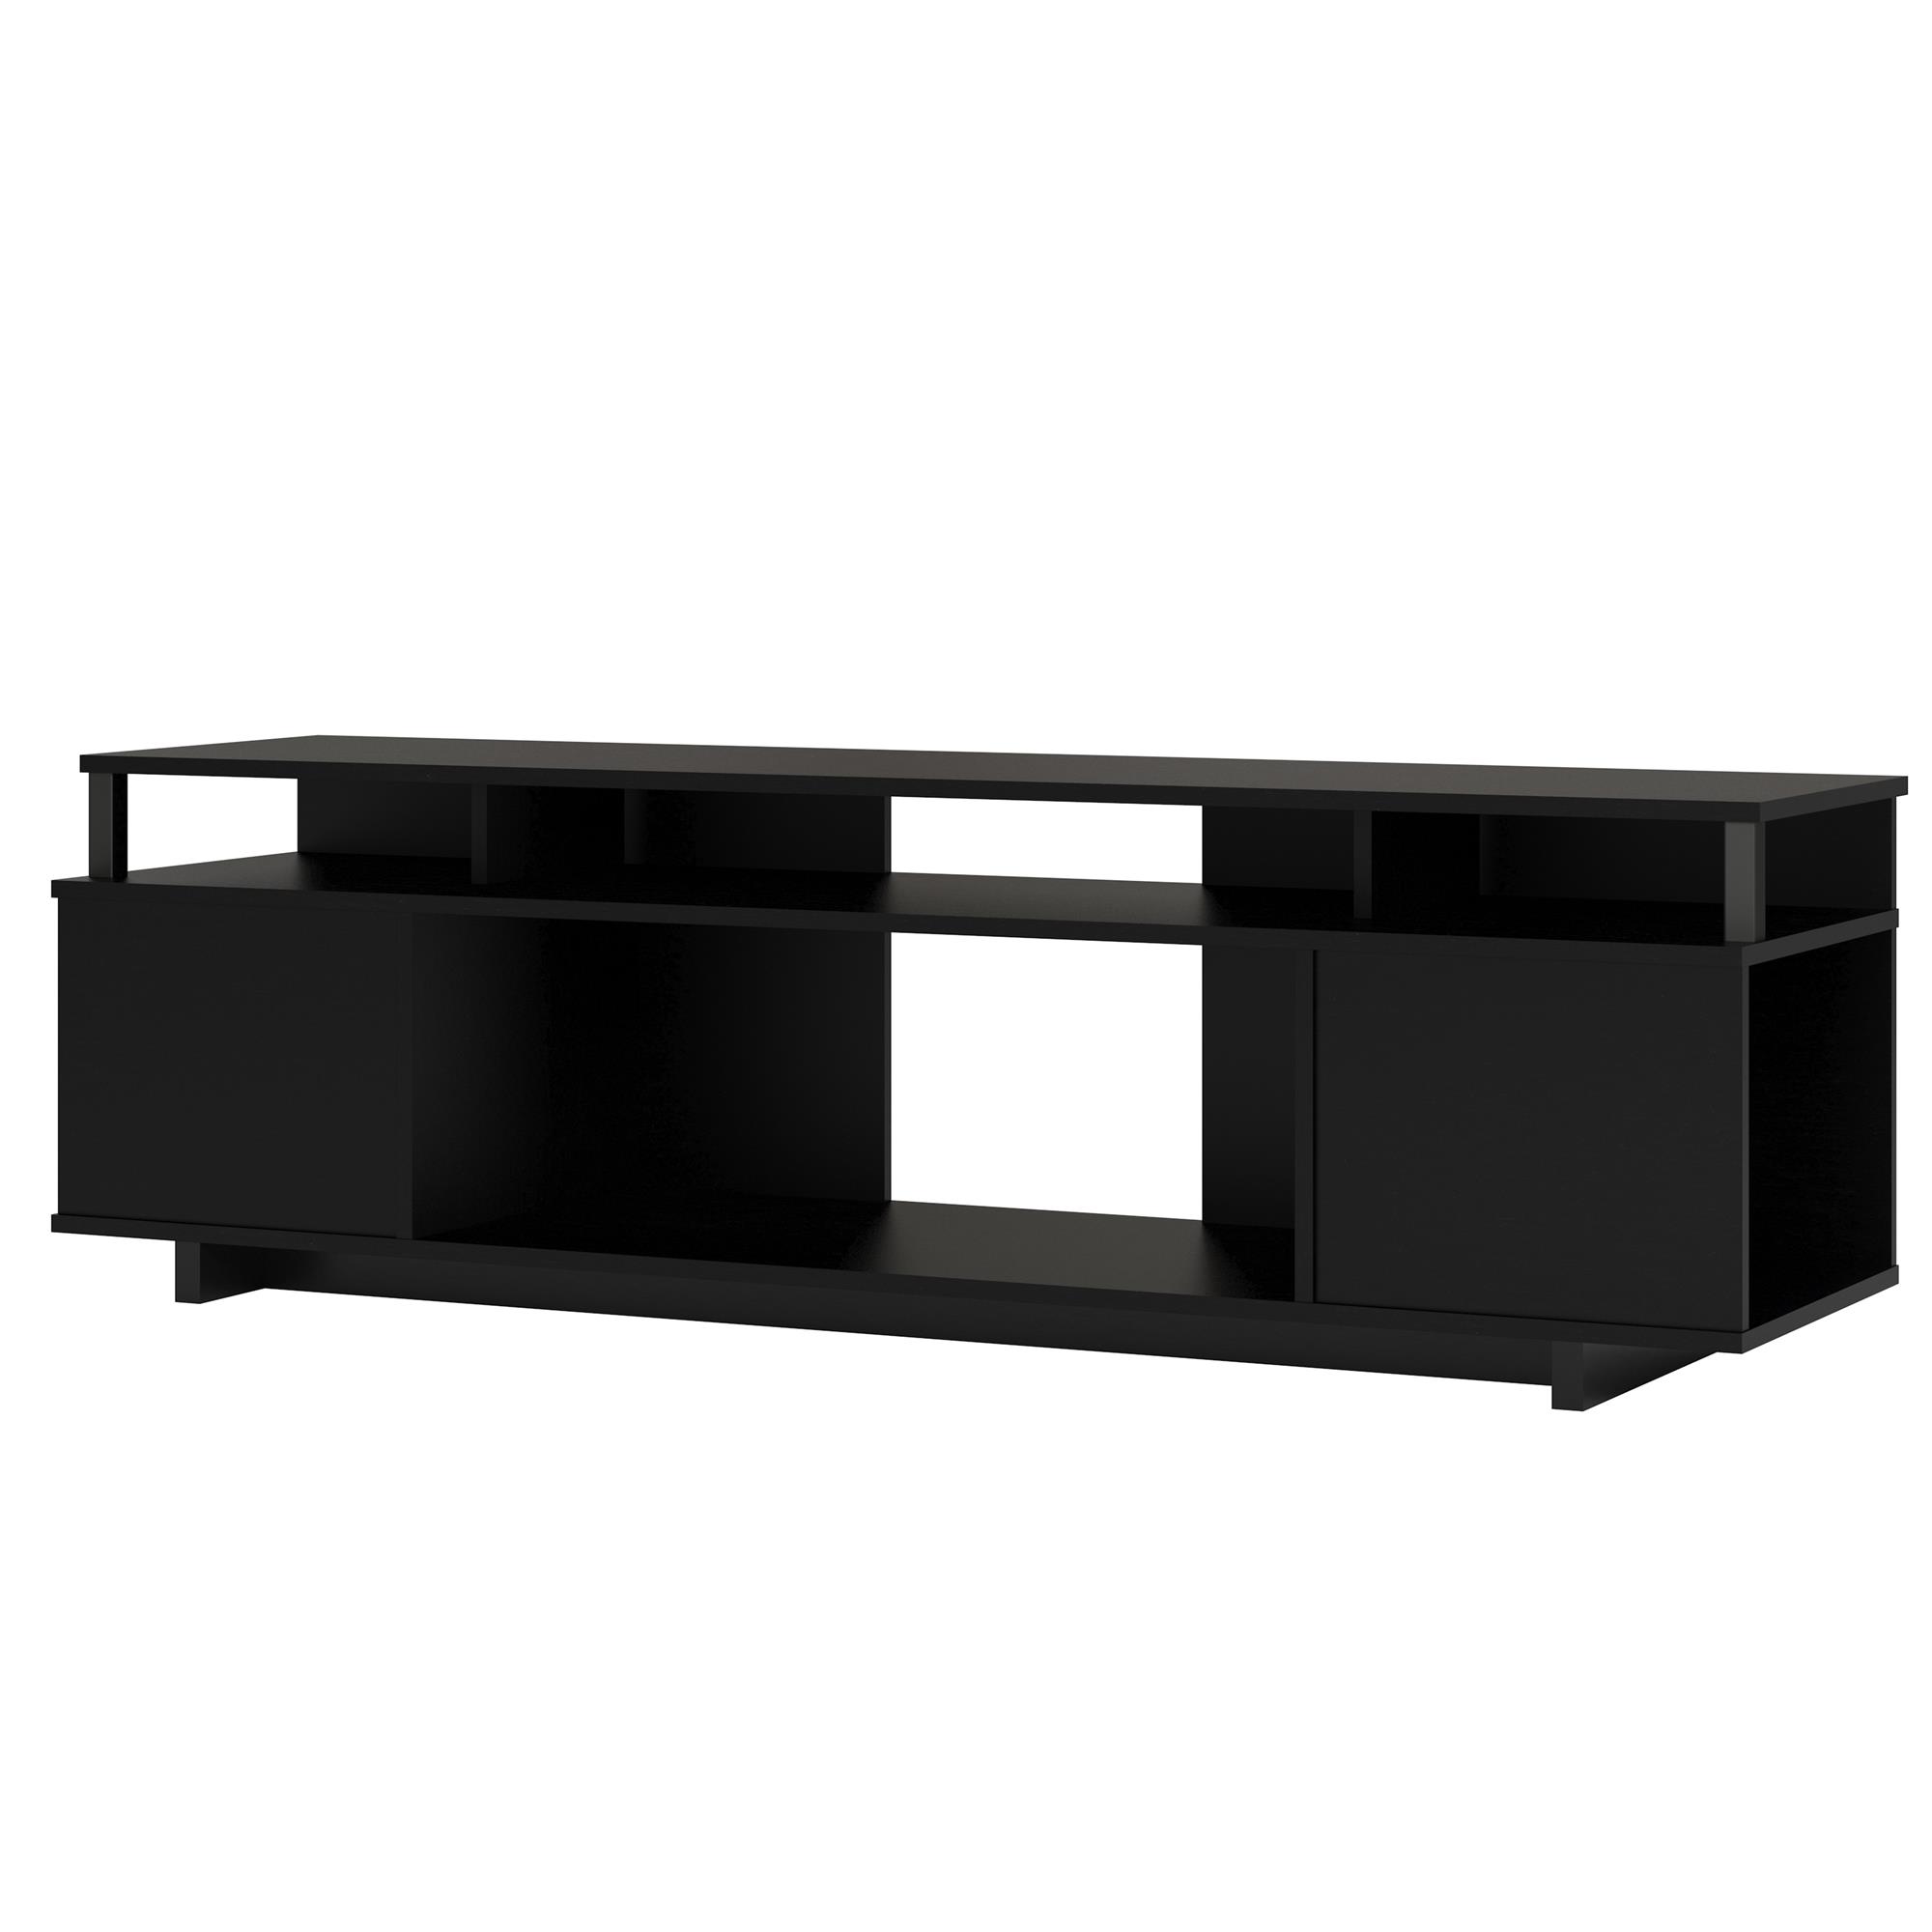 Ameriwood Home Carson TV Stand for TVs up to 65", Black Oak - image 3 of 6